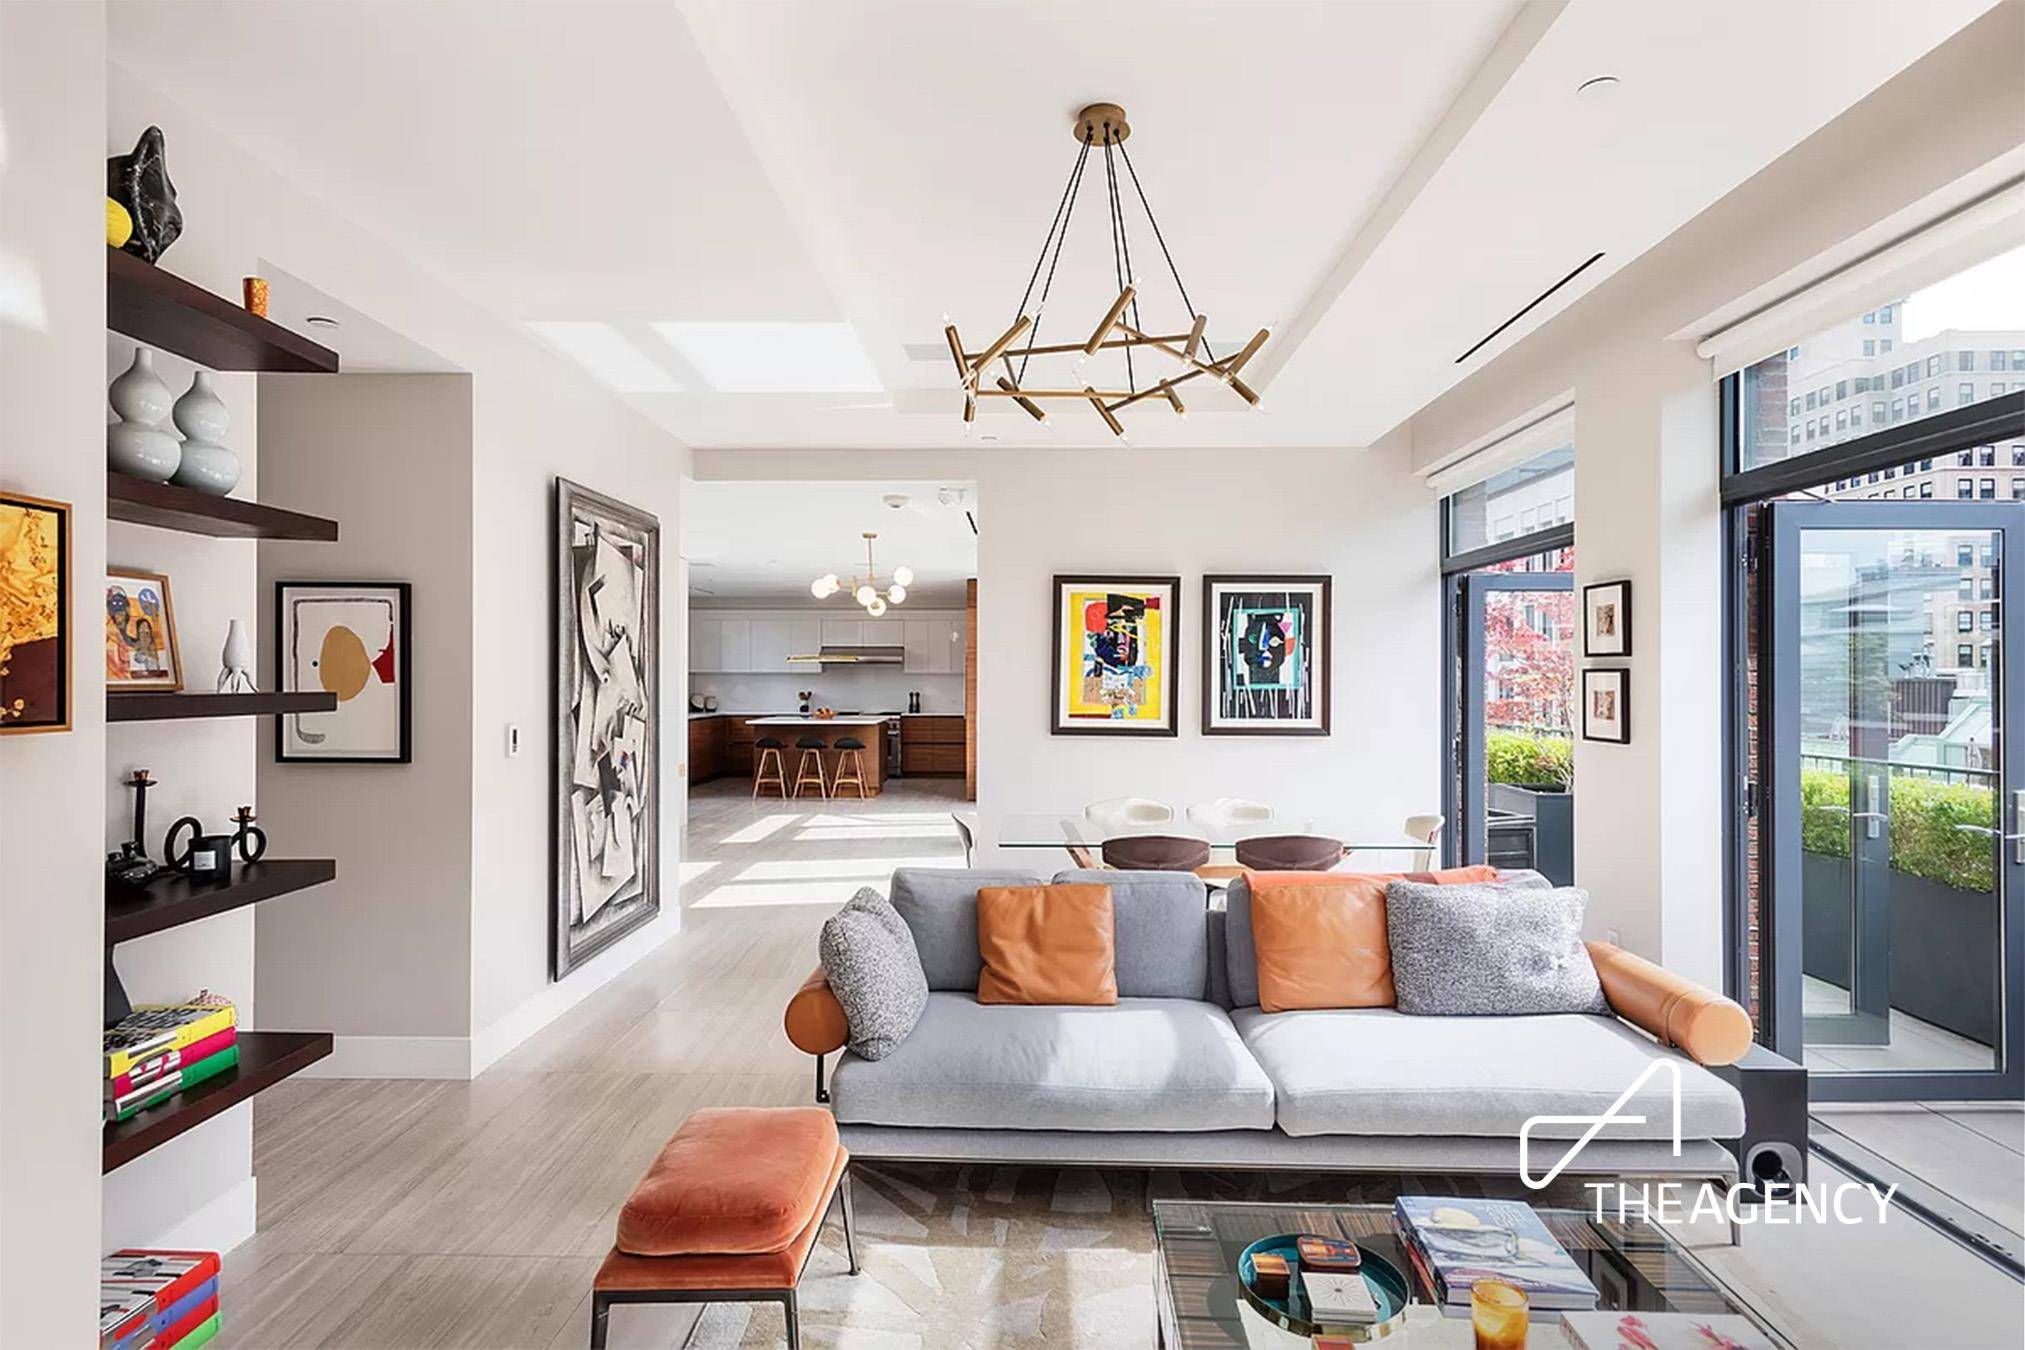 Situated atop the upper three levels of 15 Leonard Street, this opulent Tribeca triplex penthouse boasts an impressive 4, 574 SF of interior living space with 5 bedrooms, 5 full ...